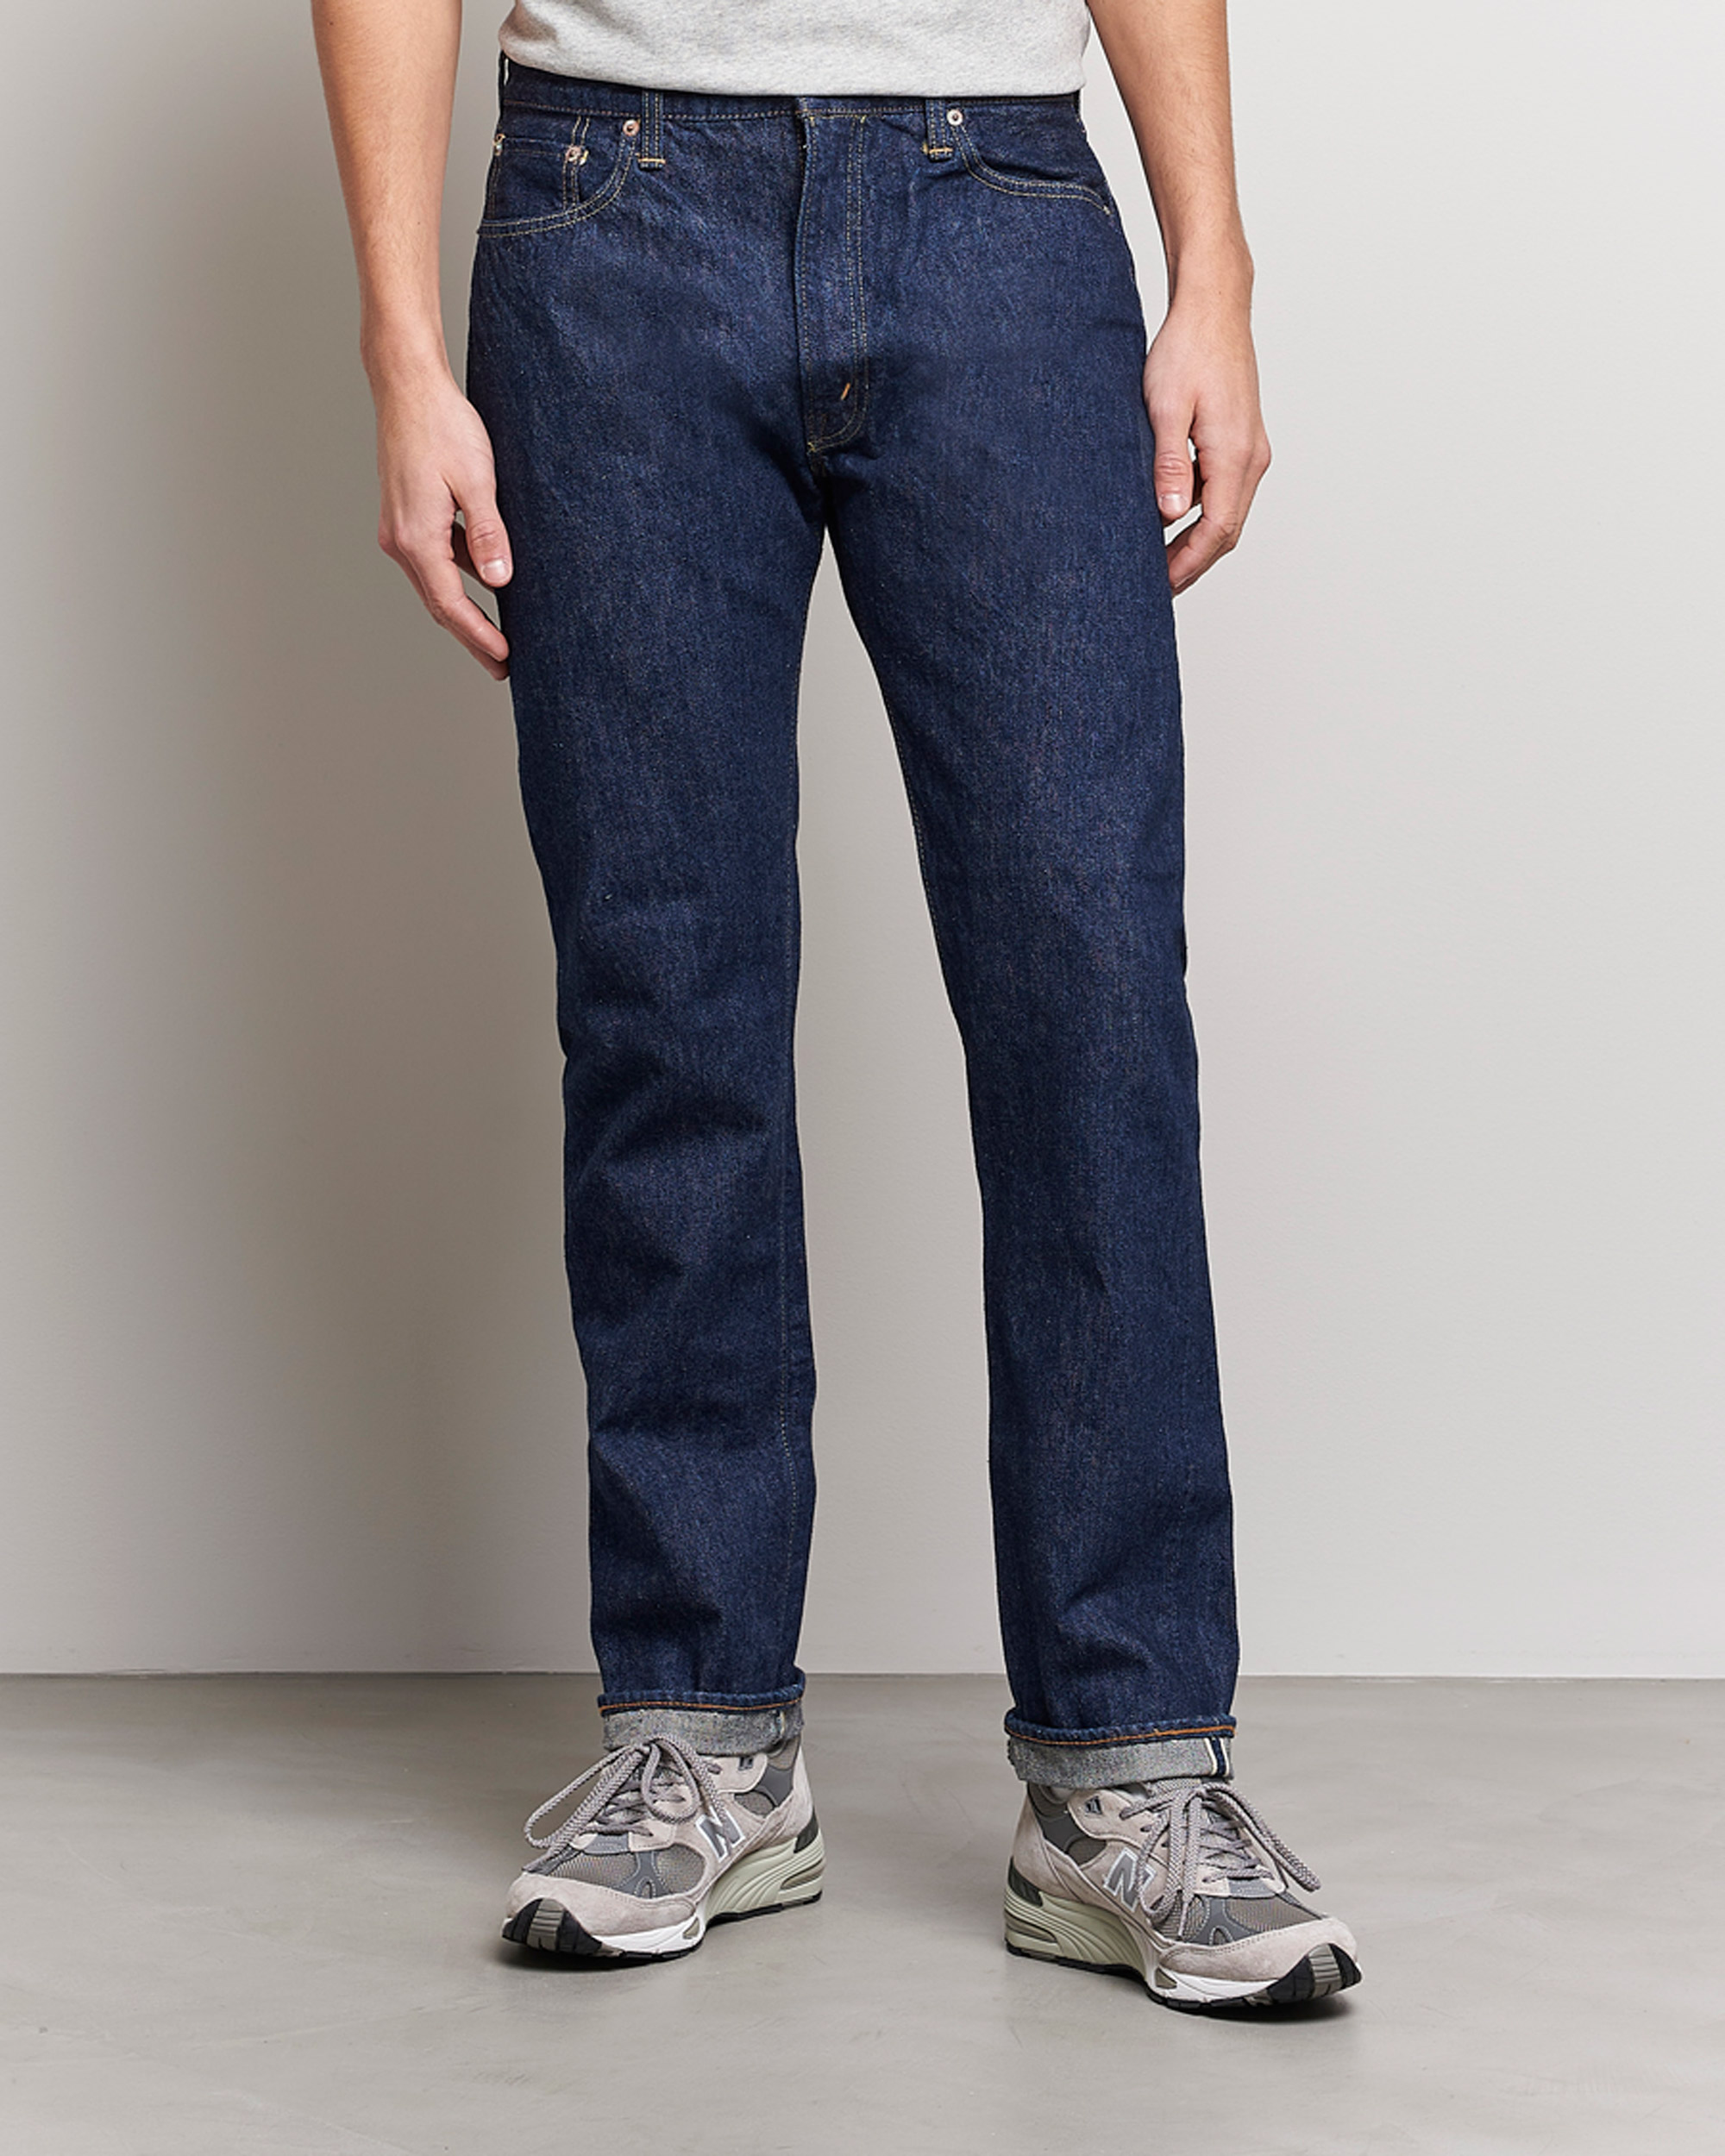 Homme | Sections | orSlow | Tapered Fit 107 Selvedge Jeans One Wash